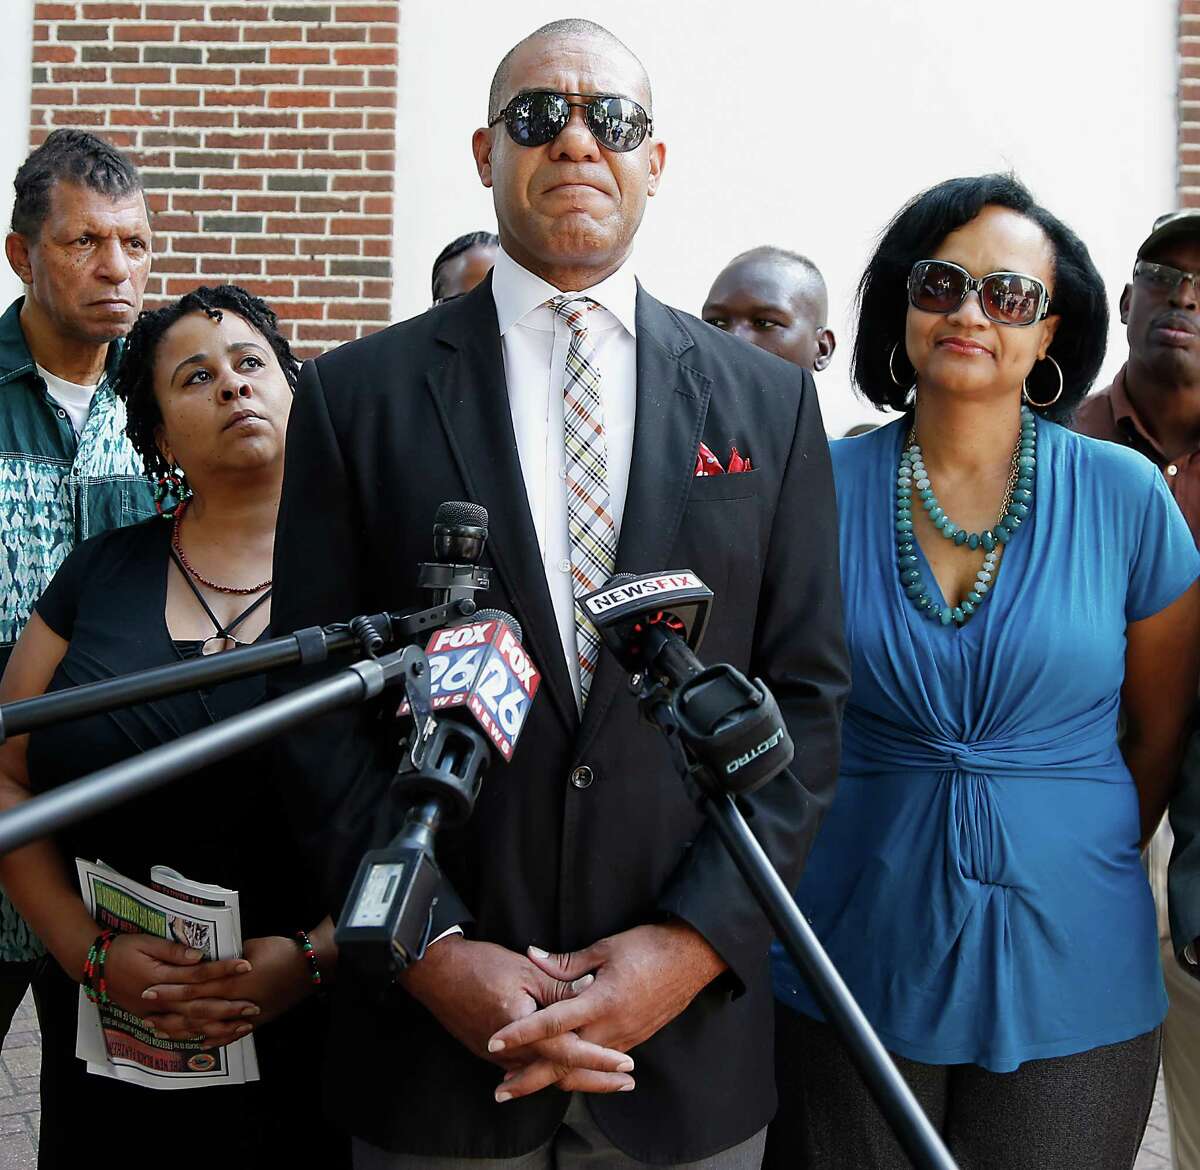 Former Houston City Councilman Jarvis Johnson center, speaks during a press conference as Johnson wife Charlene Johnson right, and Krystal Muhammad left, look on, Johnson was pulled over on September the 13th Johnson by a Precinct 1 Deputy Constable for a traffic violation Thursday, Oct. 9, 2014, in Houston. Johnson says he was held a gunpoint, slapped and robbed of $2,500 cash a Precinct 1 Deputy Constable pulled who Johnson over for allegedly speeding. ( James Nielsen / Houston Chronicle )